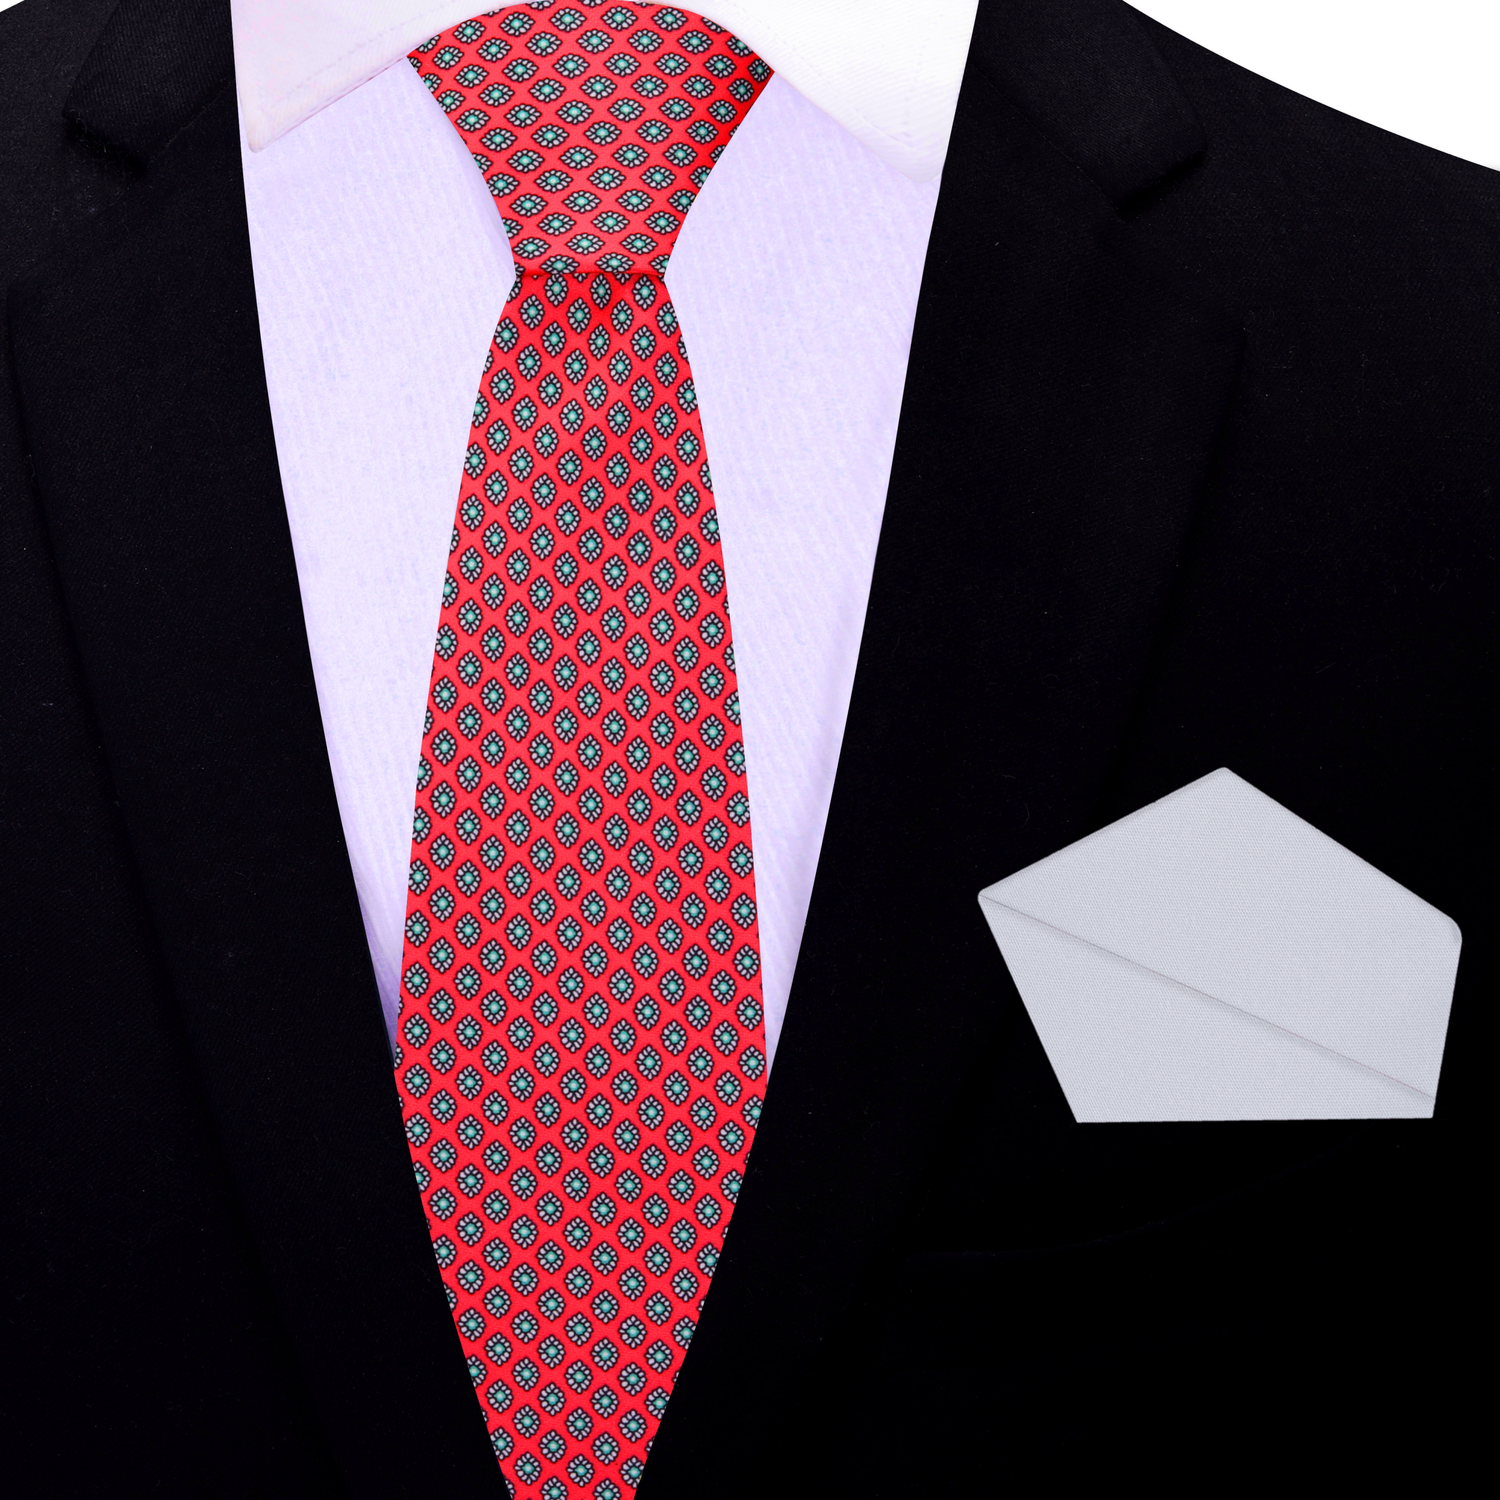 Thin Tie: Red Small Medallion Tie and Light Grey Square